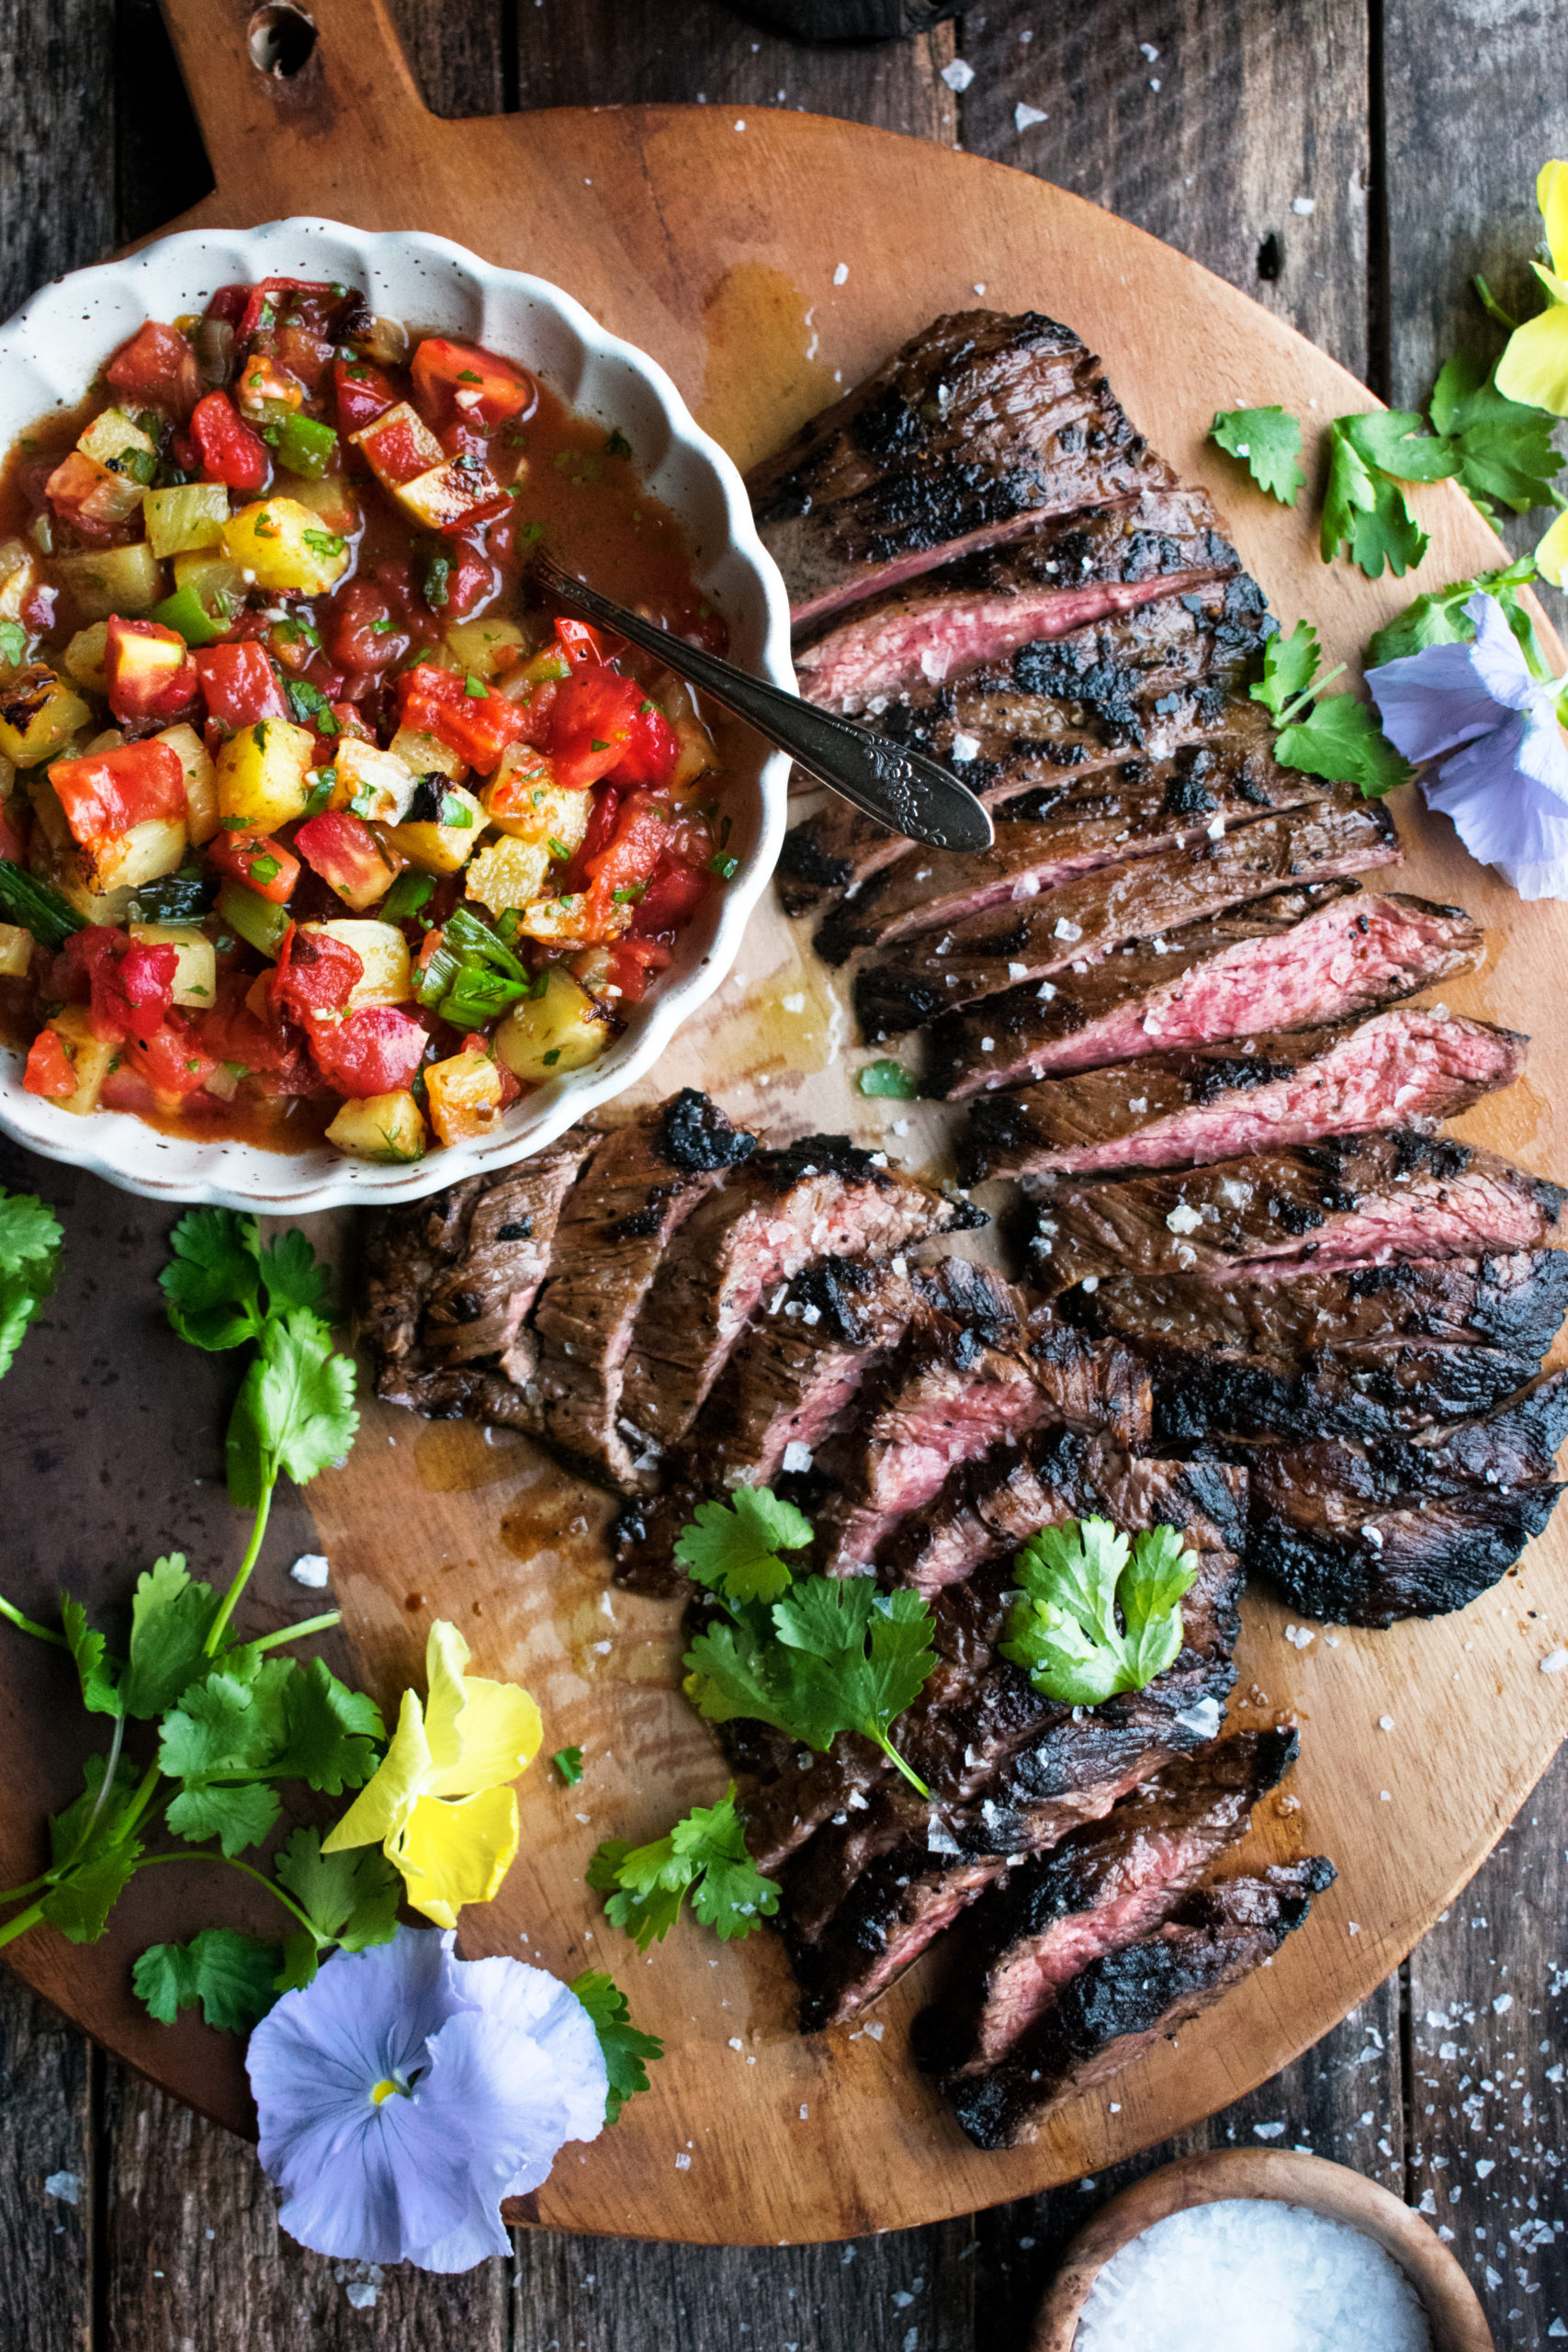 Mezcal Marinated Skirt Steak With Grilled Pineapple Salsa The Original Dish 